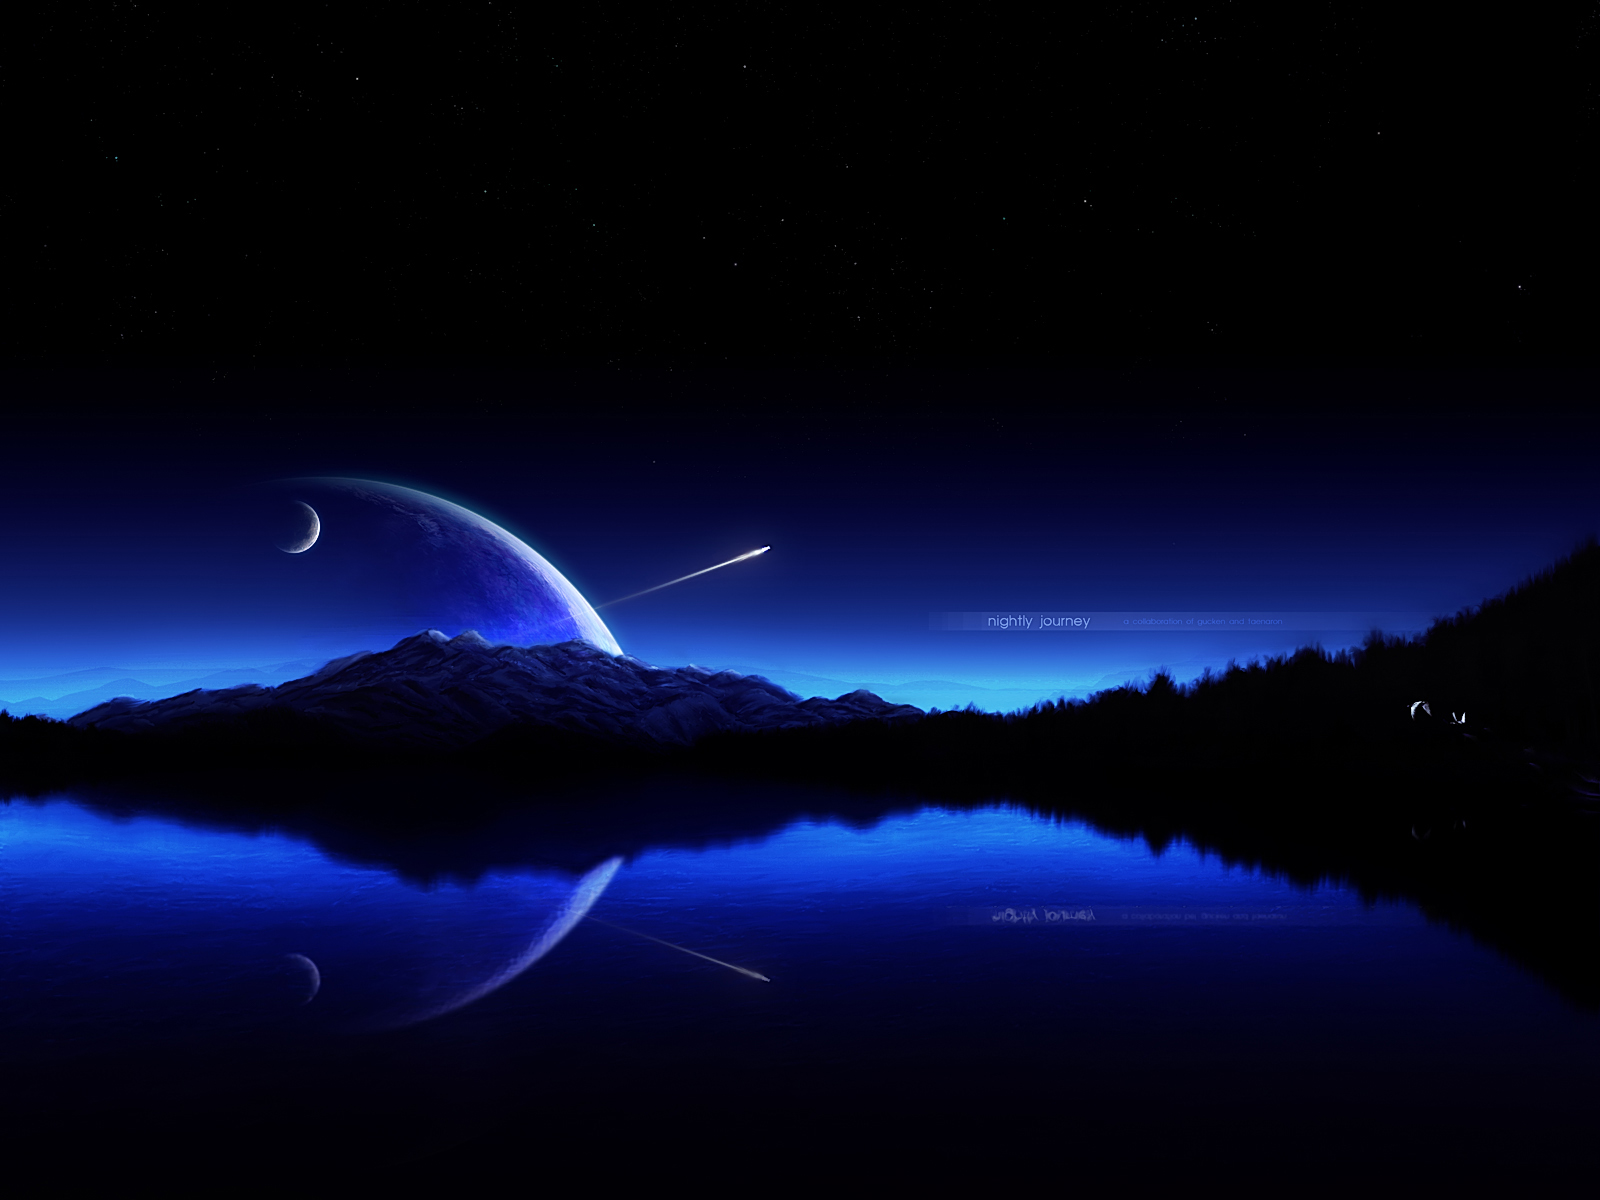  Wallpapers Night Time Perfection Desktop Wallpapers Night Time